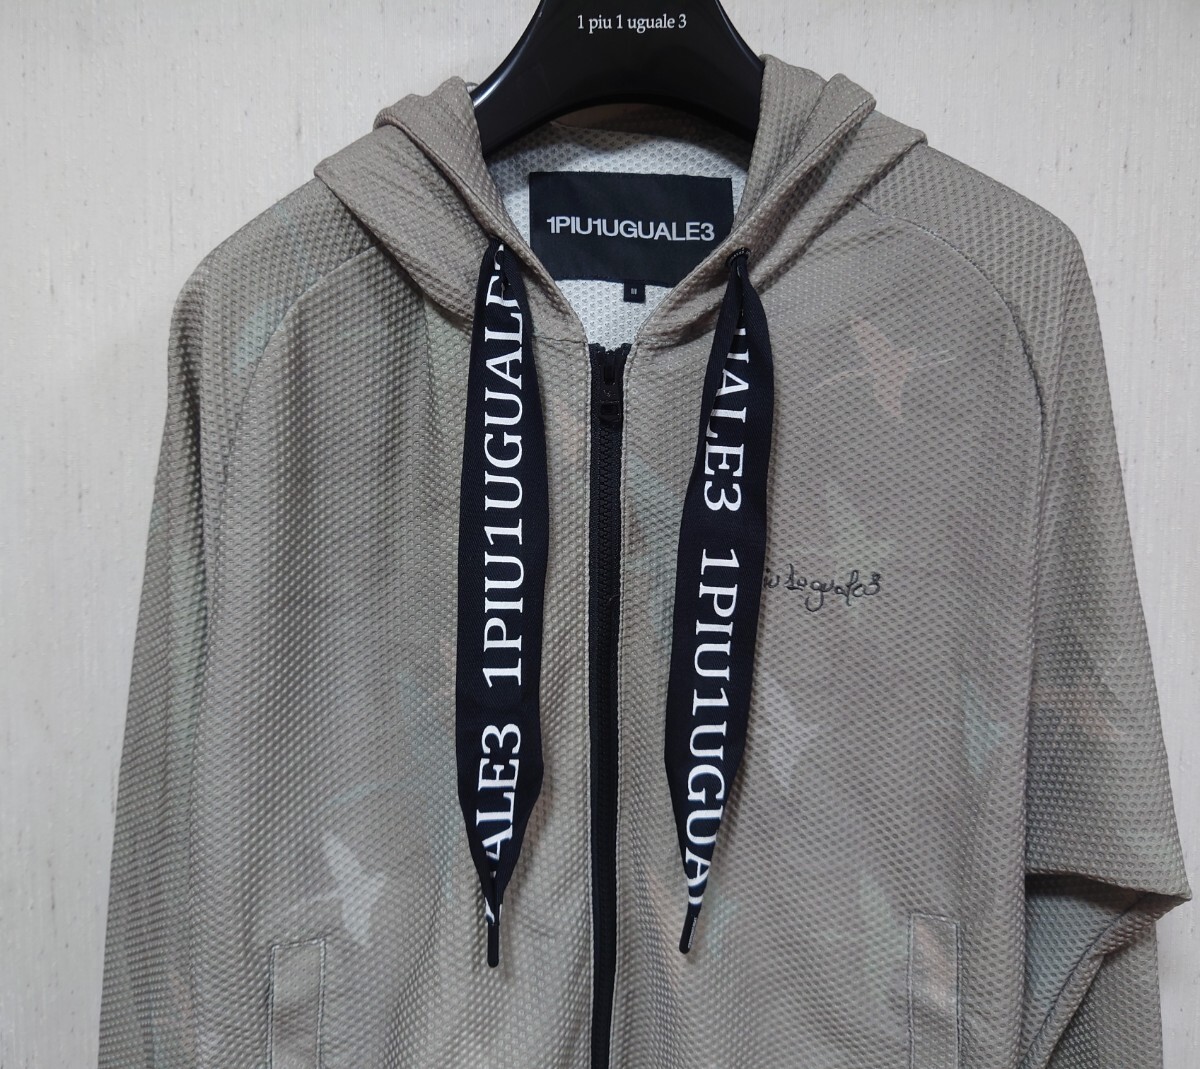 1piu1uguale3×R[ONE] (ウノピュウノウグァーレトレ) BIG SPINDLE MESH CAMO PARKA 2020SS RONE103-MS02 color GRAY size Ⅲ(S) akm fixerの画像7